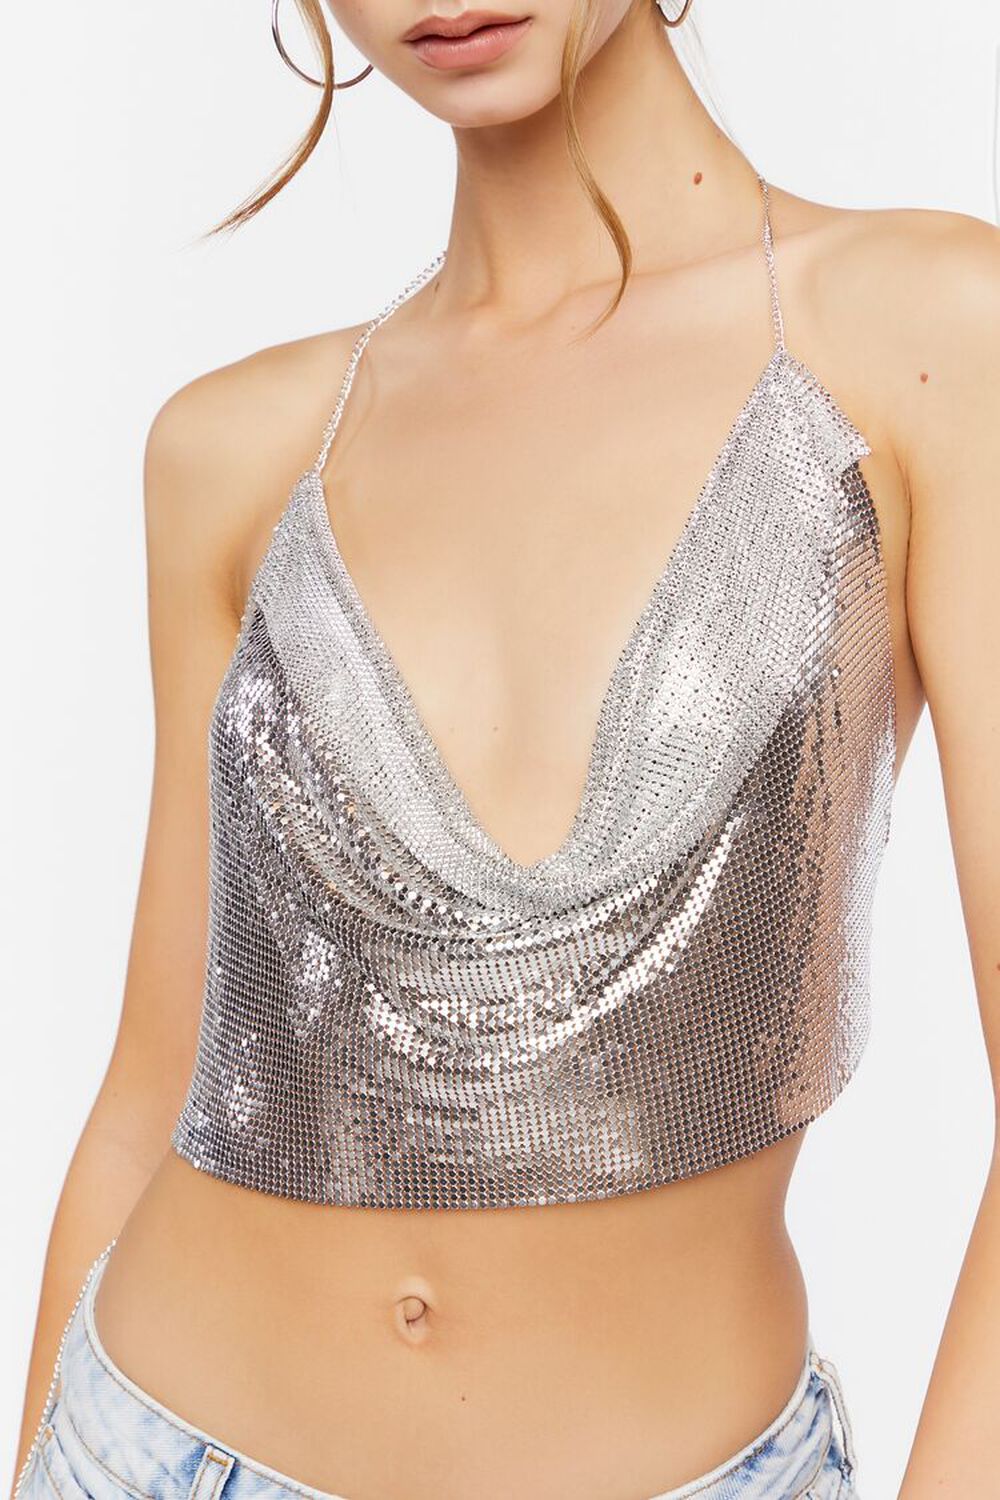 Chainmail Halter Top w/ Black Neck Piece - O/S